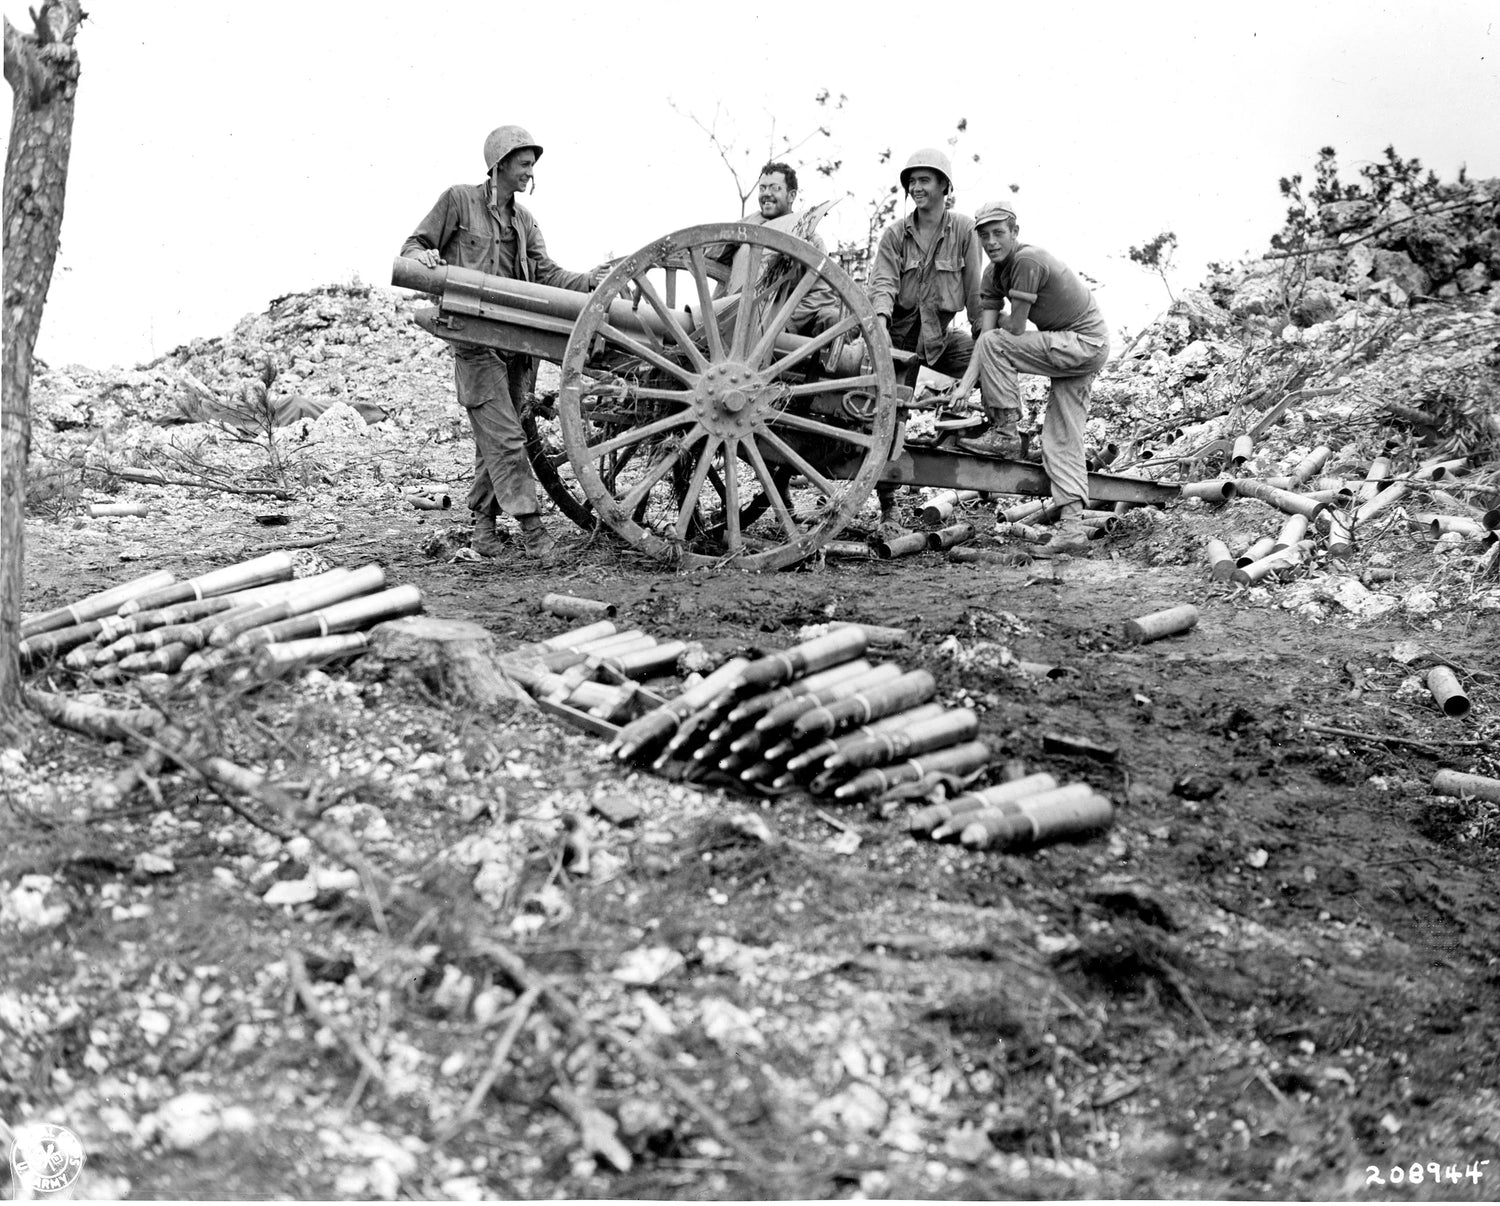 Men of Co. B, 184th Inf. Regt., inspect a Japanese 75-mm gun they captured on Okinawa. 29 May 1945.